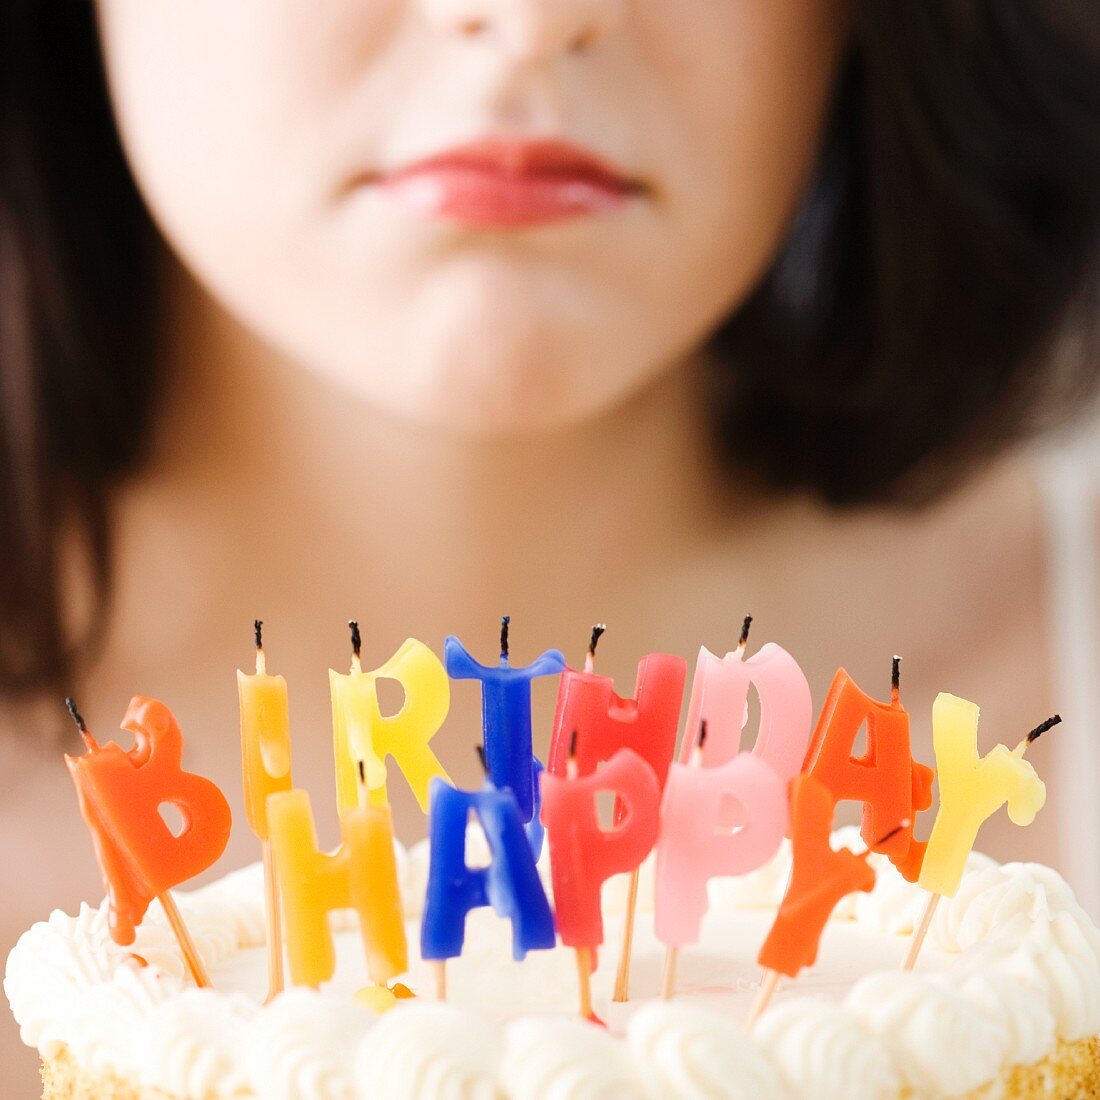 Woman frowning at blown out birthday candles